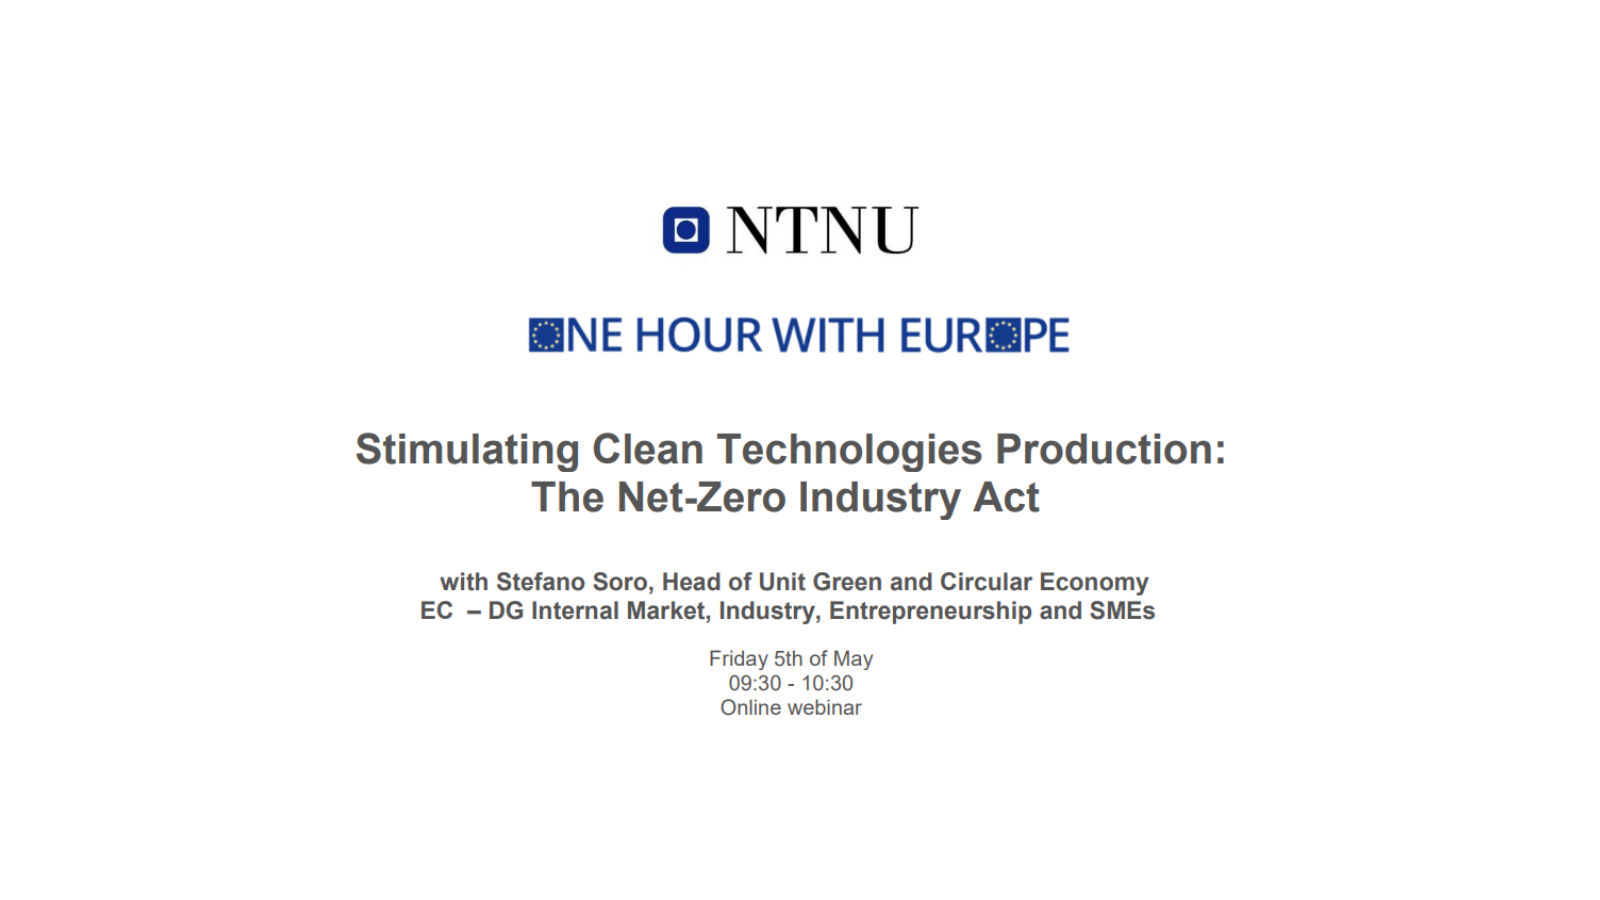 One Hour with Europe webinar series "Stimulating Clean Technologies Production: The Net-Zero Industry Act" 